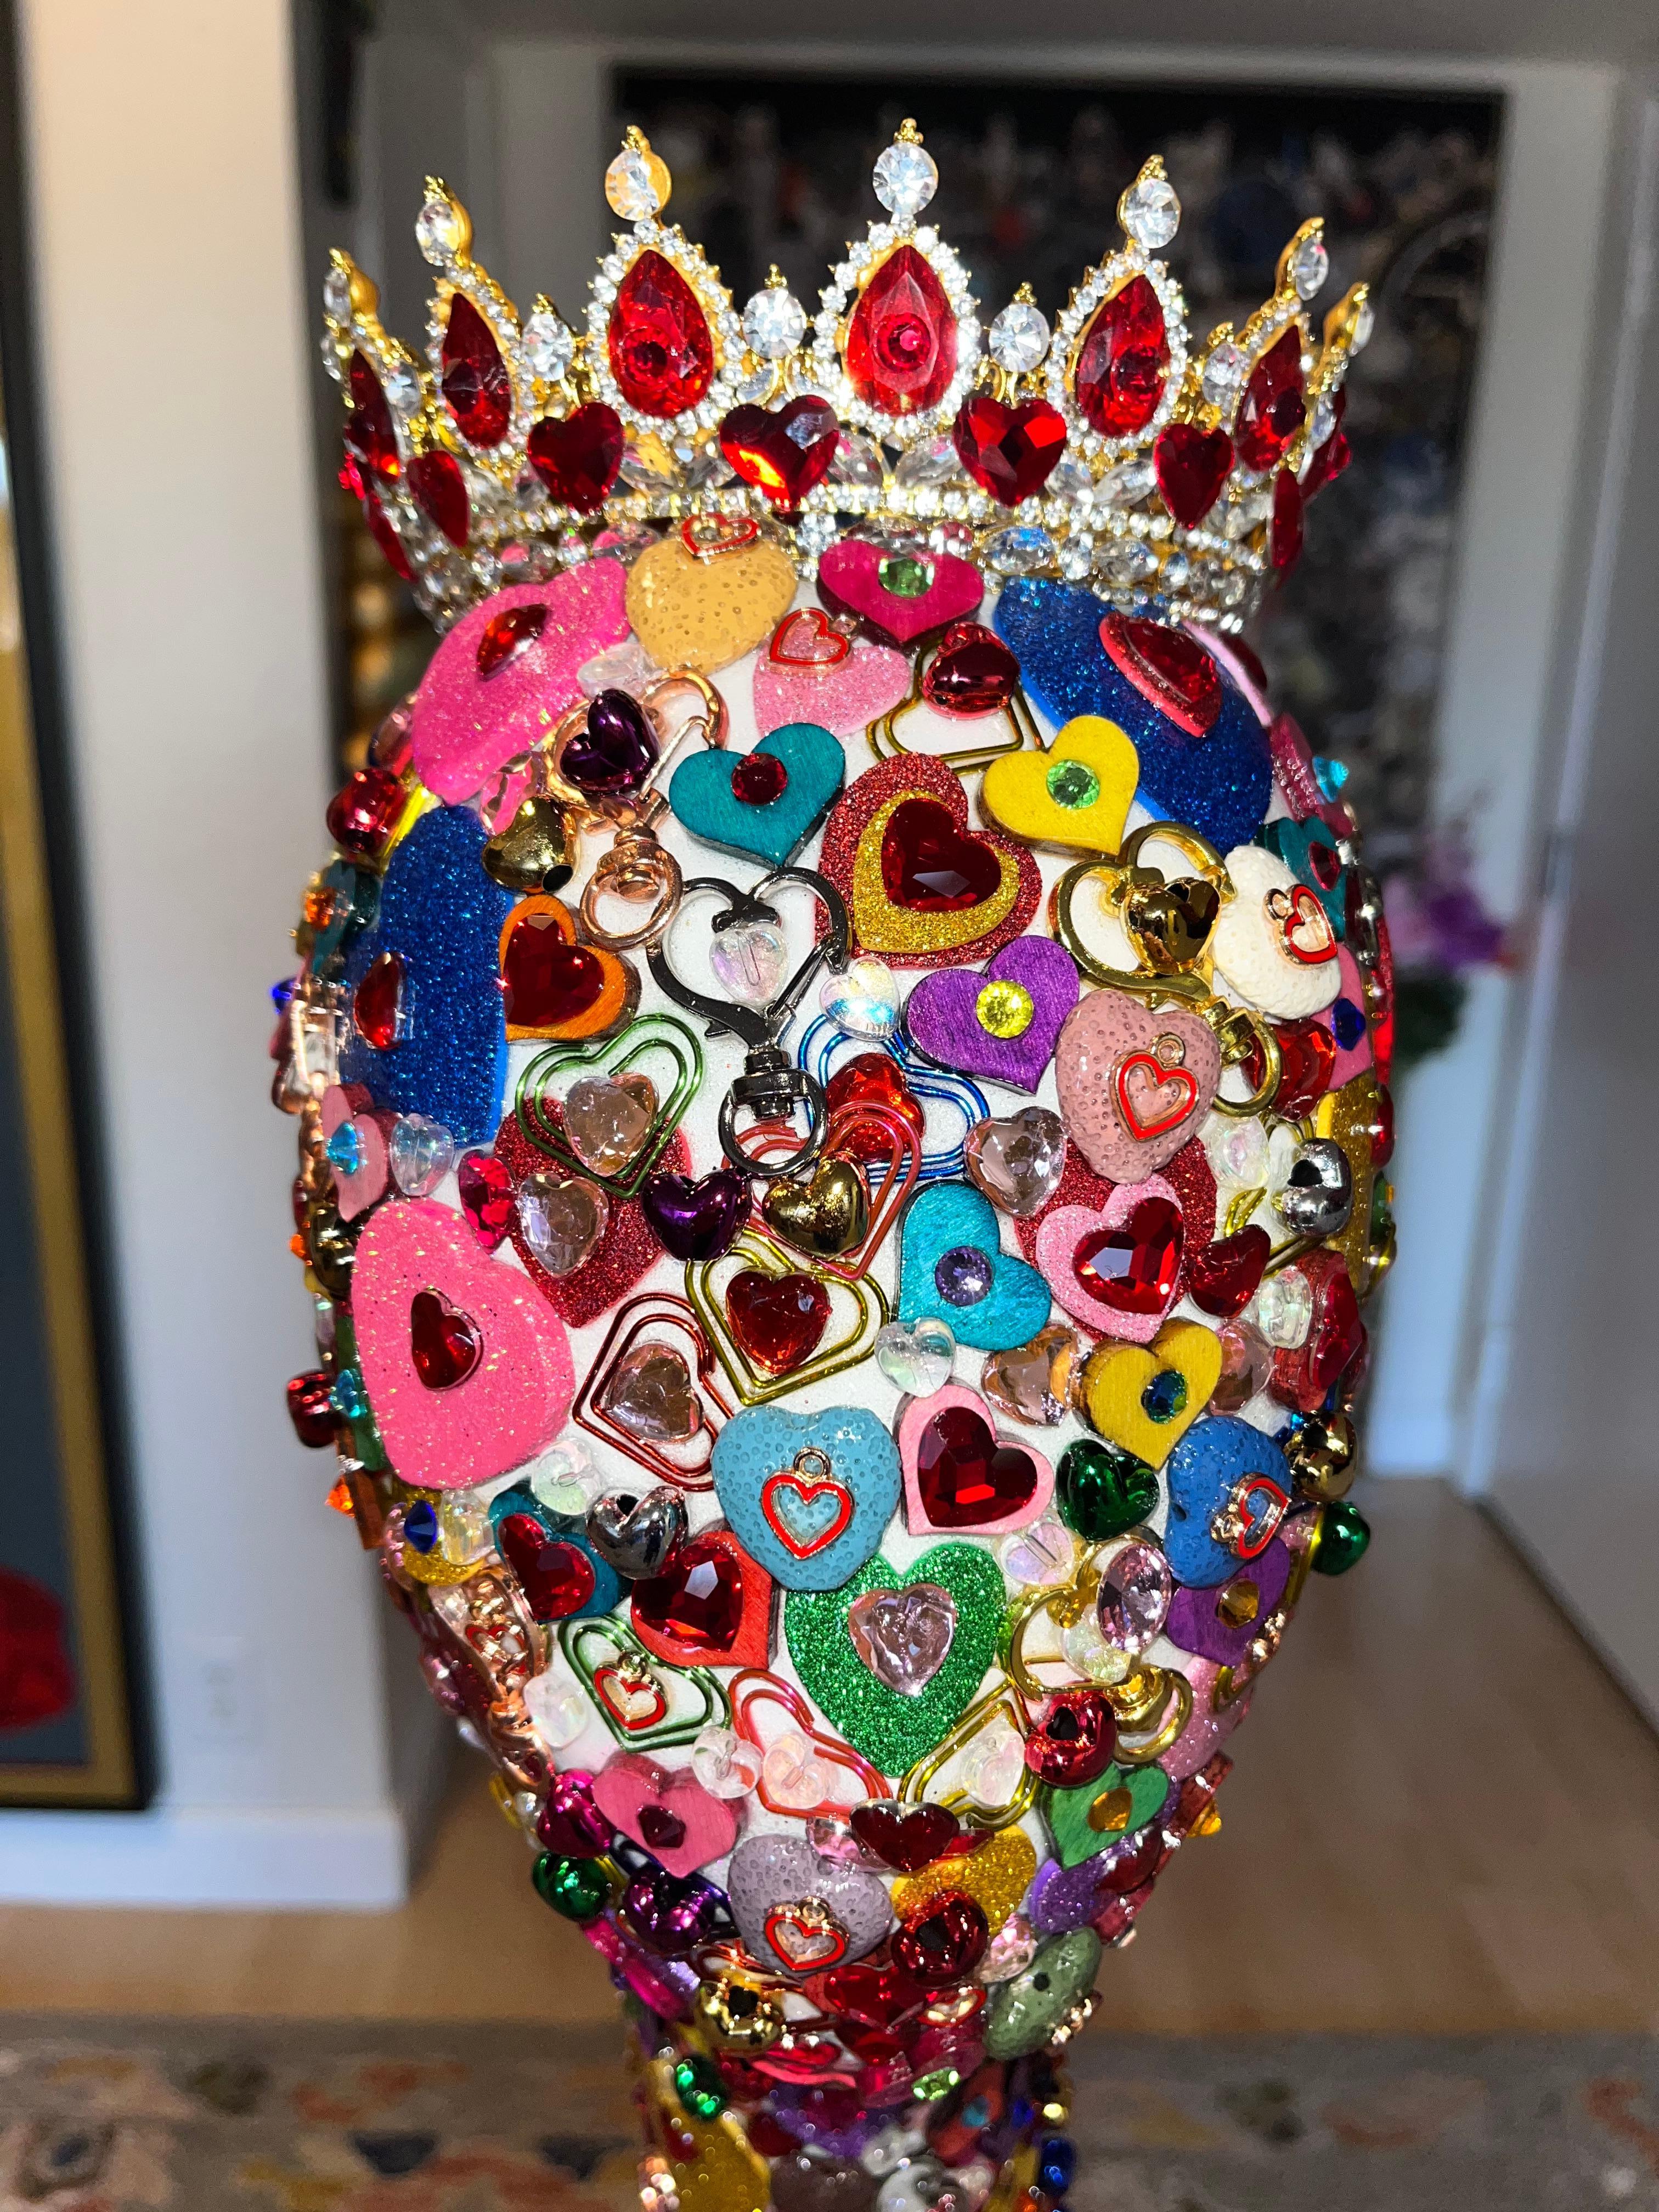 QUEEN OF HEARTS (Original and One of A Kind Mixed Media Sculpture) 8